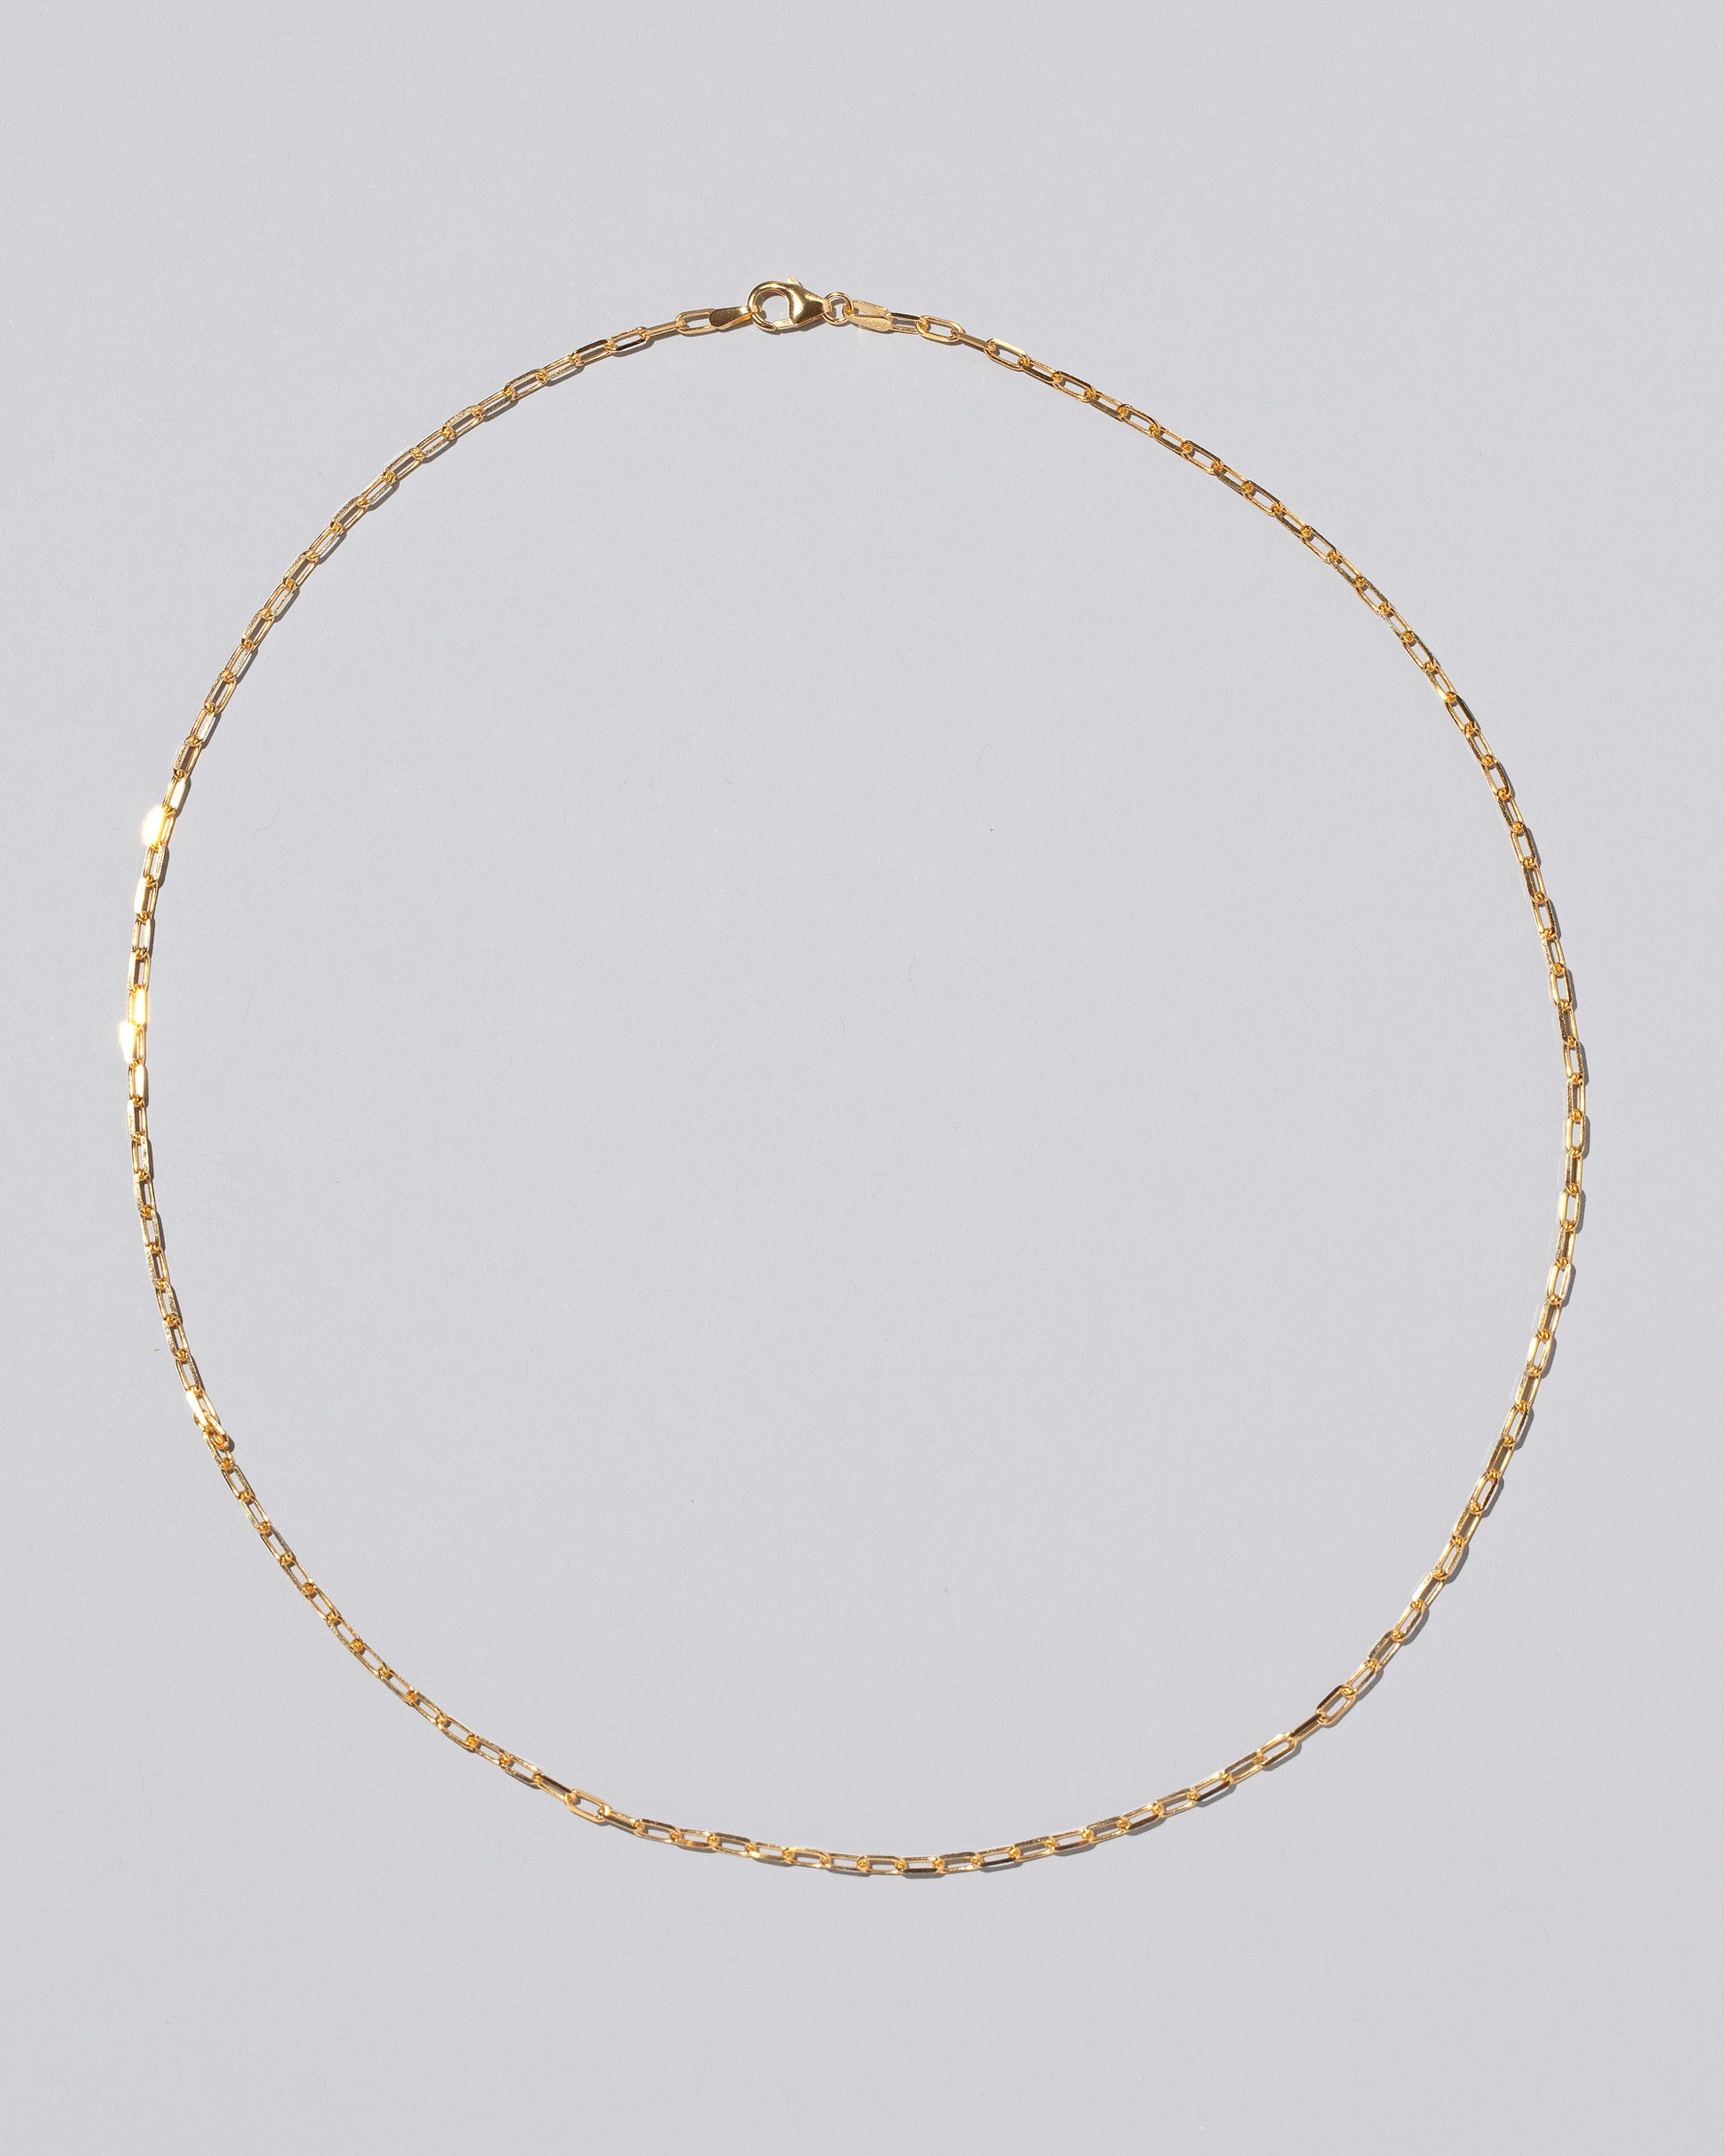 2.2mm Lightweight Beveled Oval Chain Necklace on light color background.